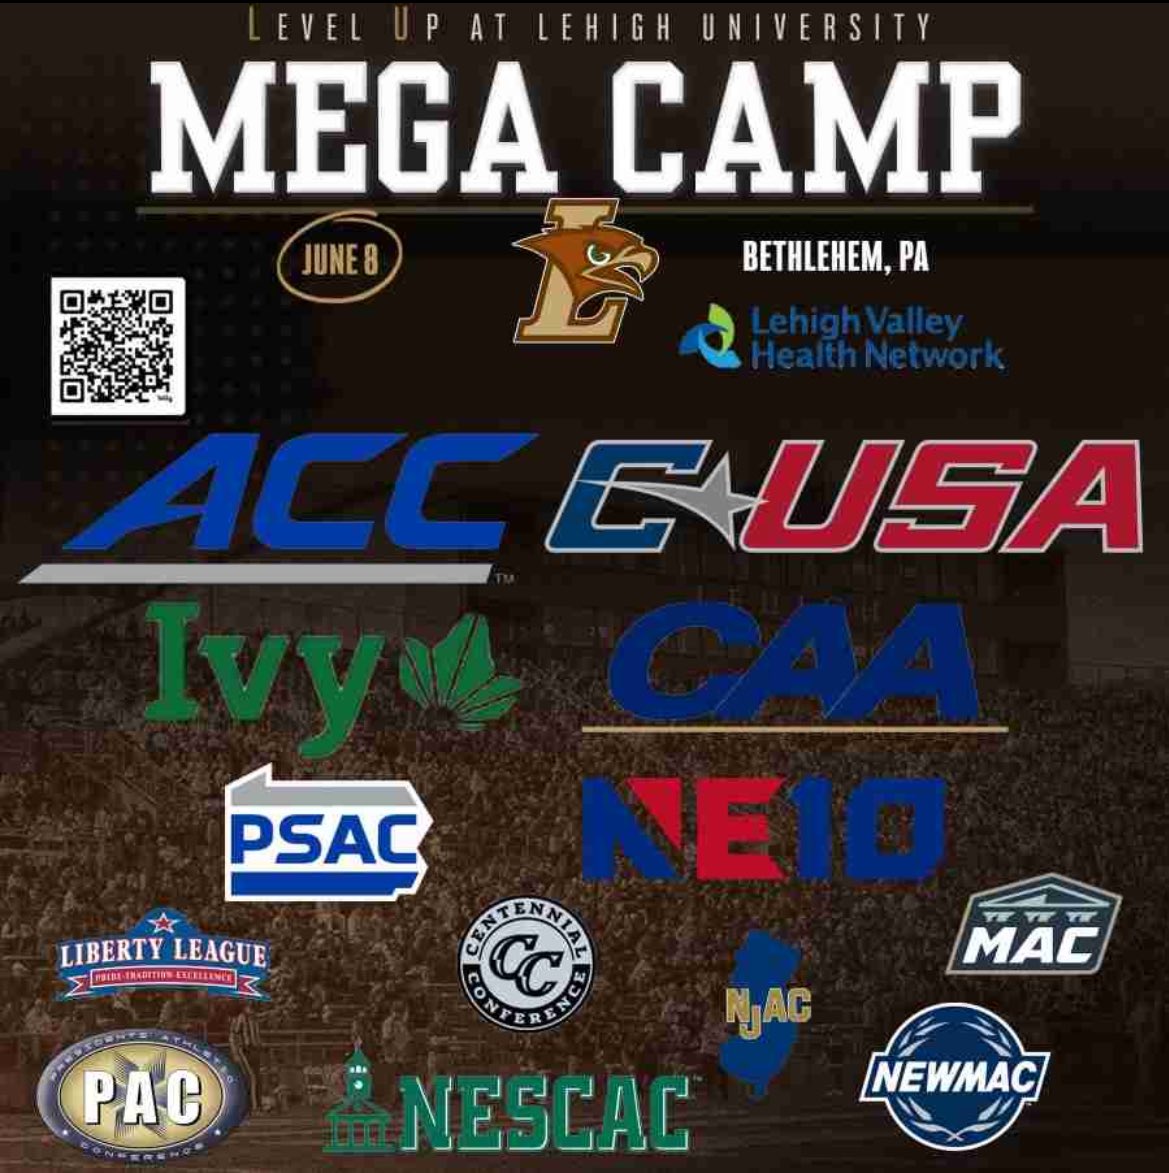 Thanks for the camp invite @coach_cahill looking forward to competing!